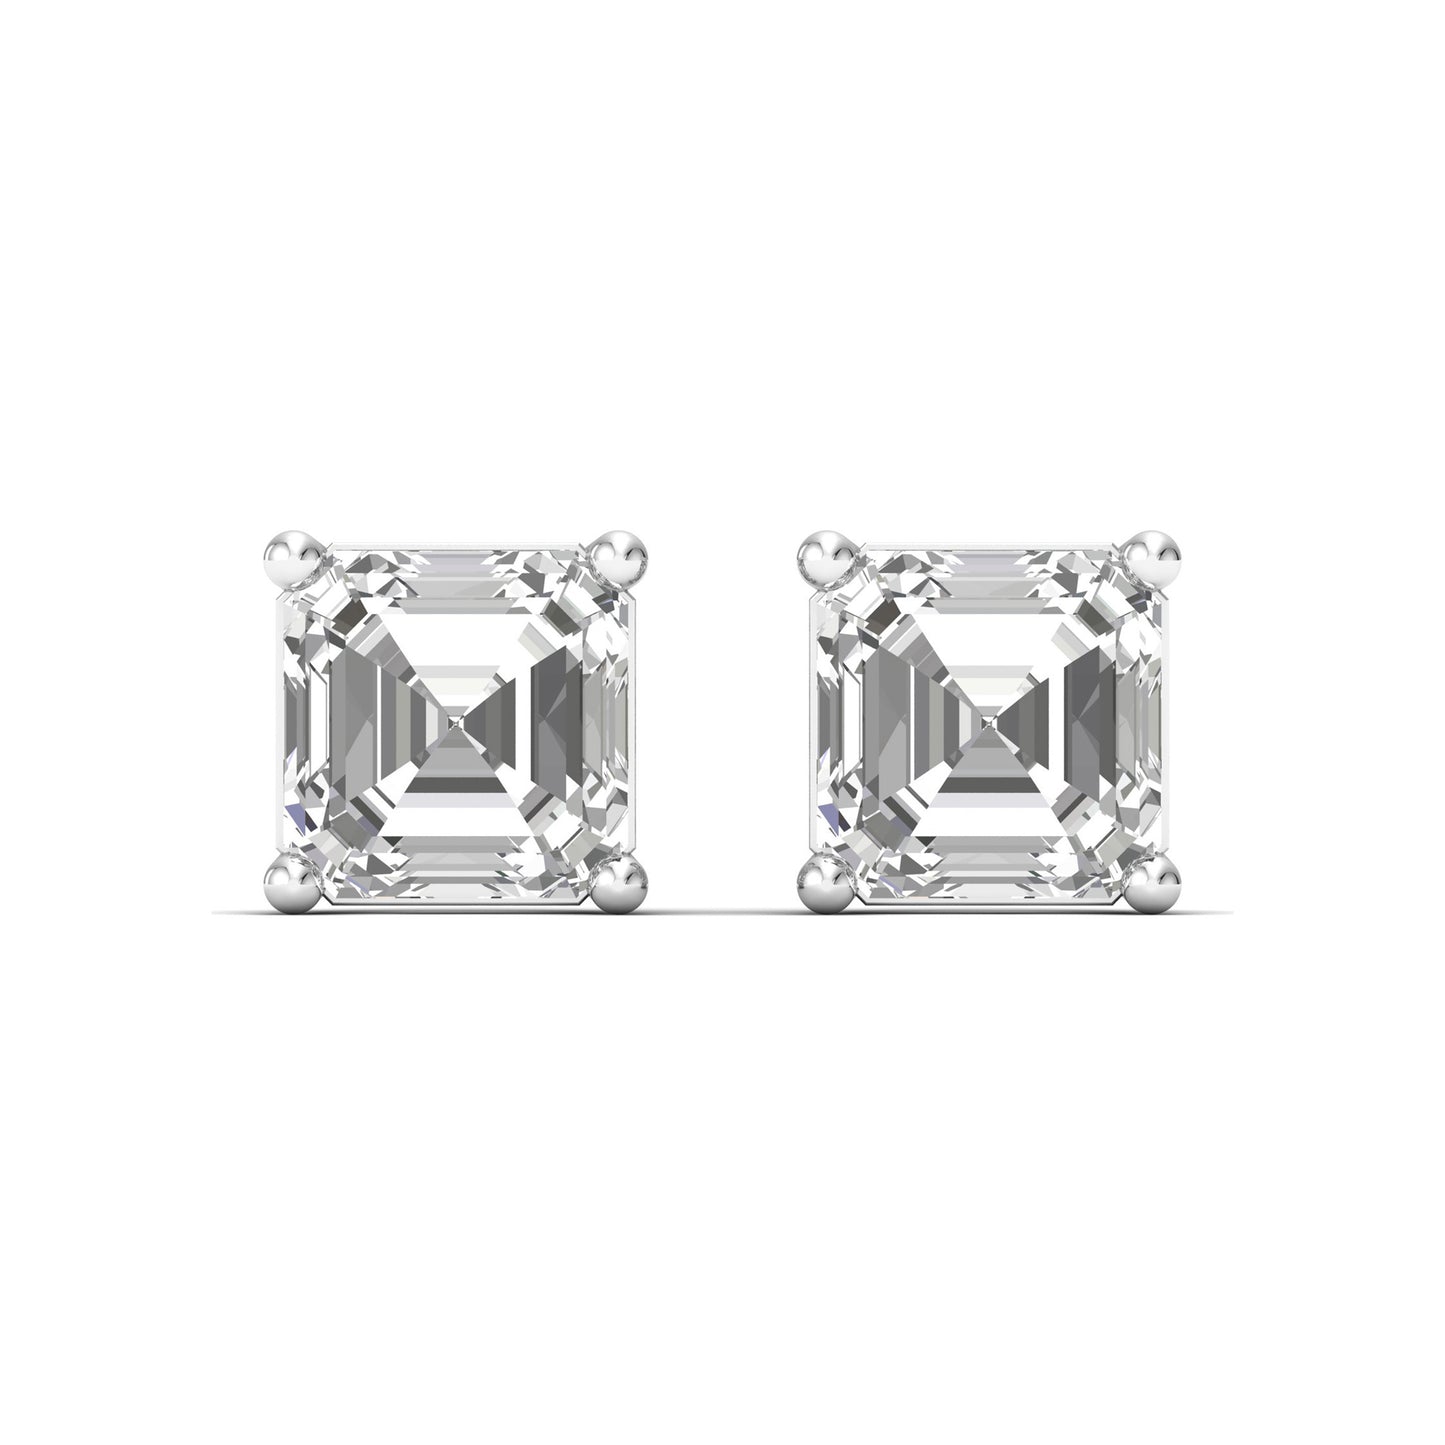 Sophisticated Glamour: Illuminate Your Look with Asscher-Cut Diamond Earrings!